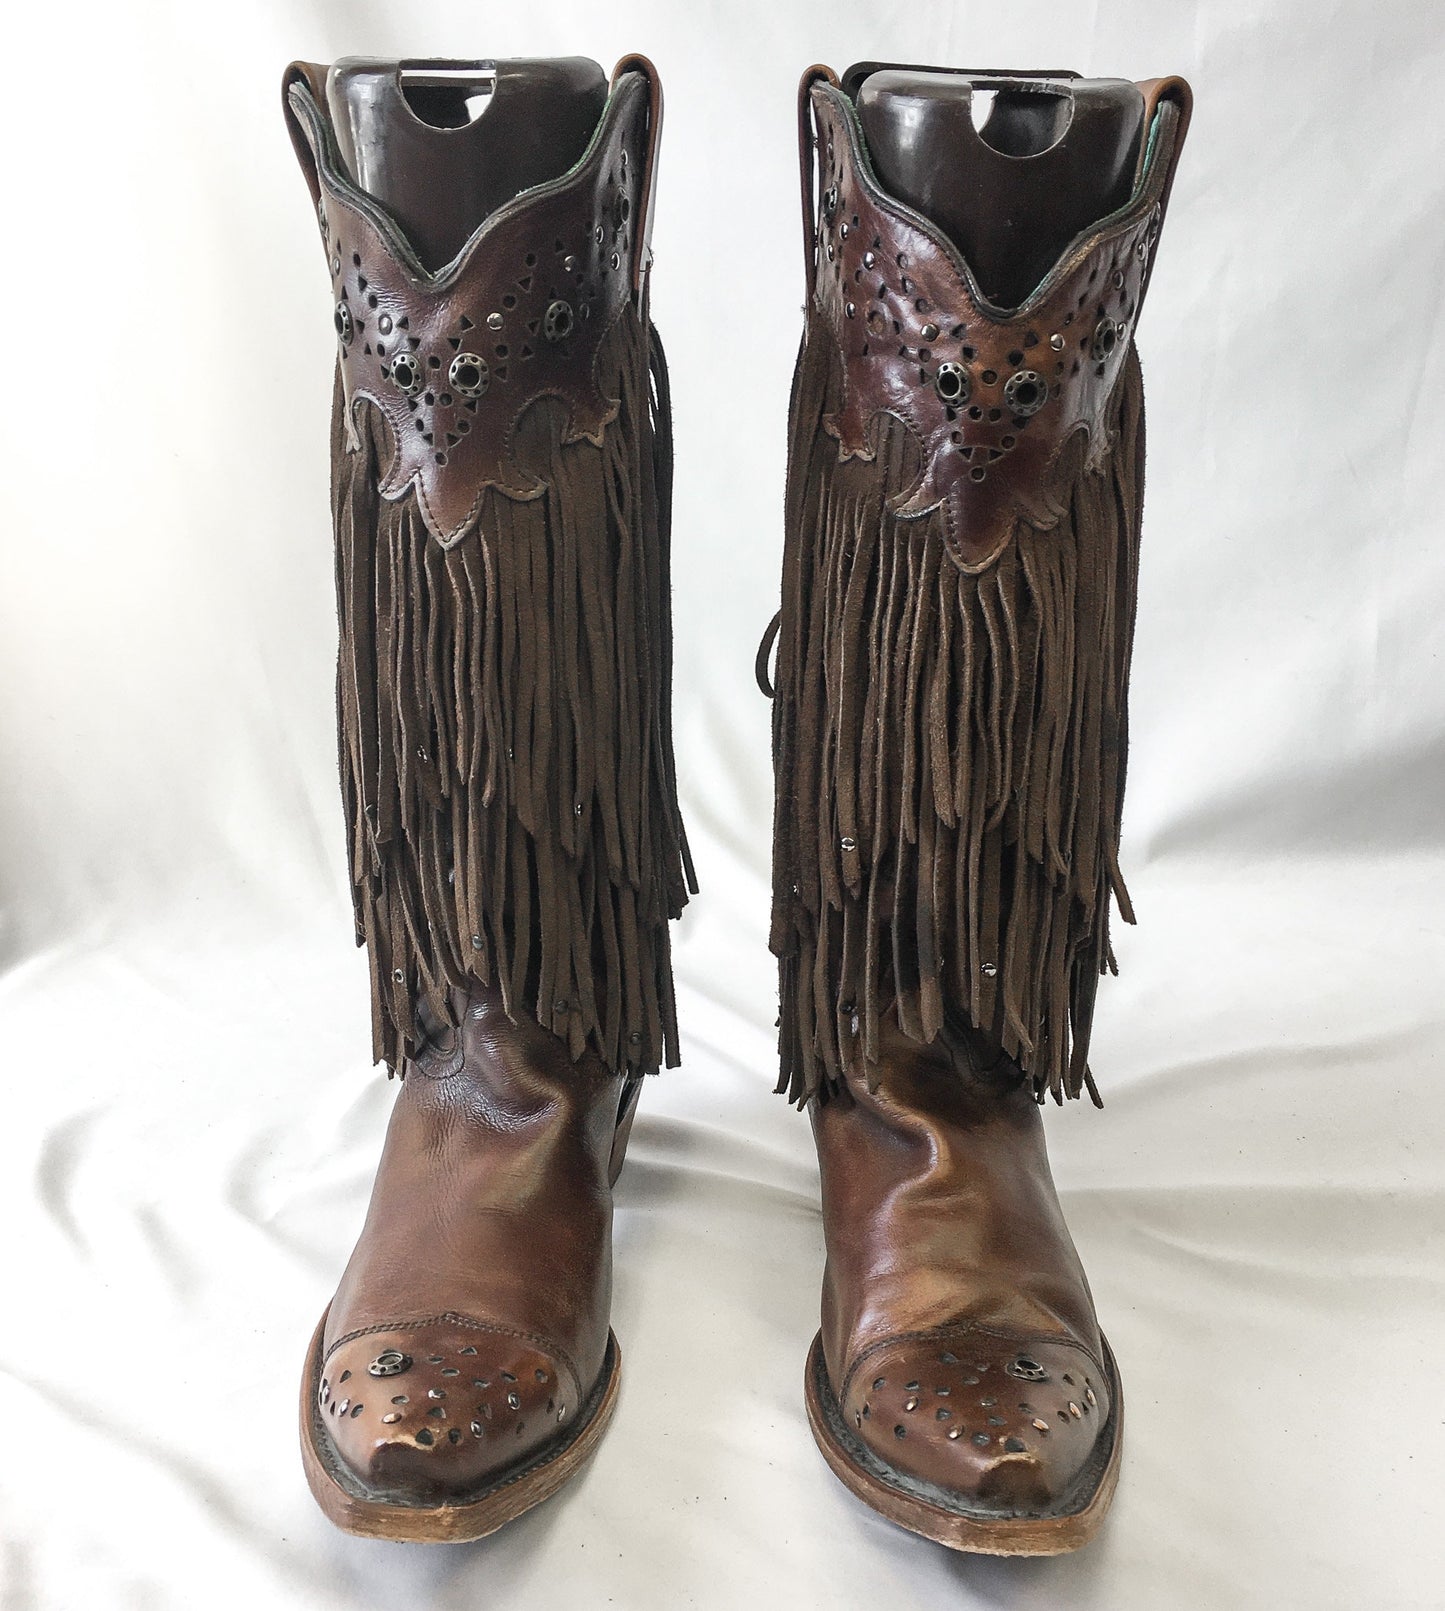 Vintage Inspired Corral Sierra Brown Fringe and Studs Snip Toe Leather Cowboy Boots, Style C1185, Women's Sz. 10M